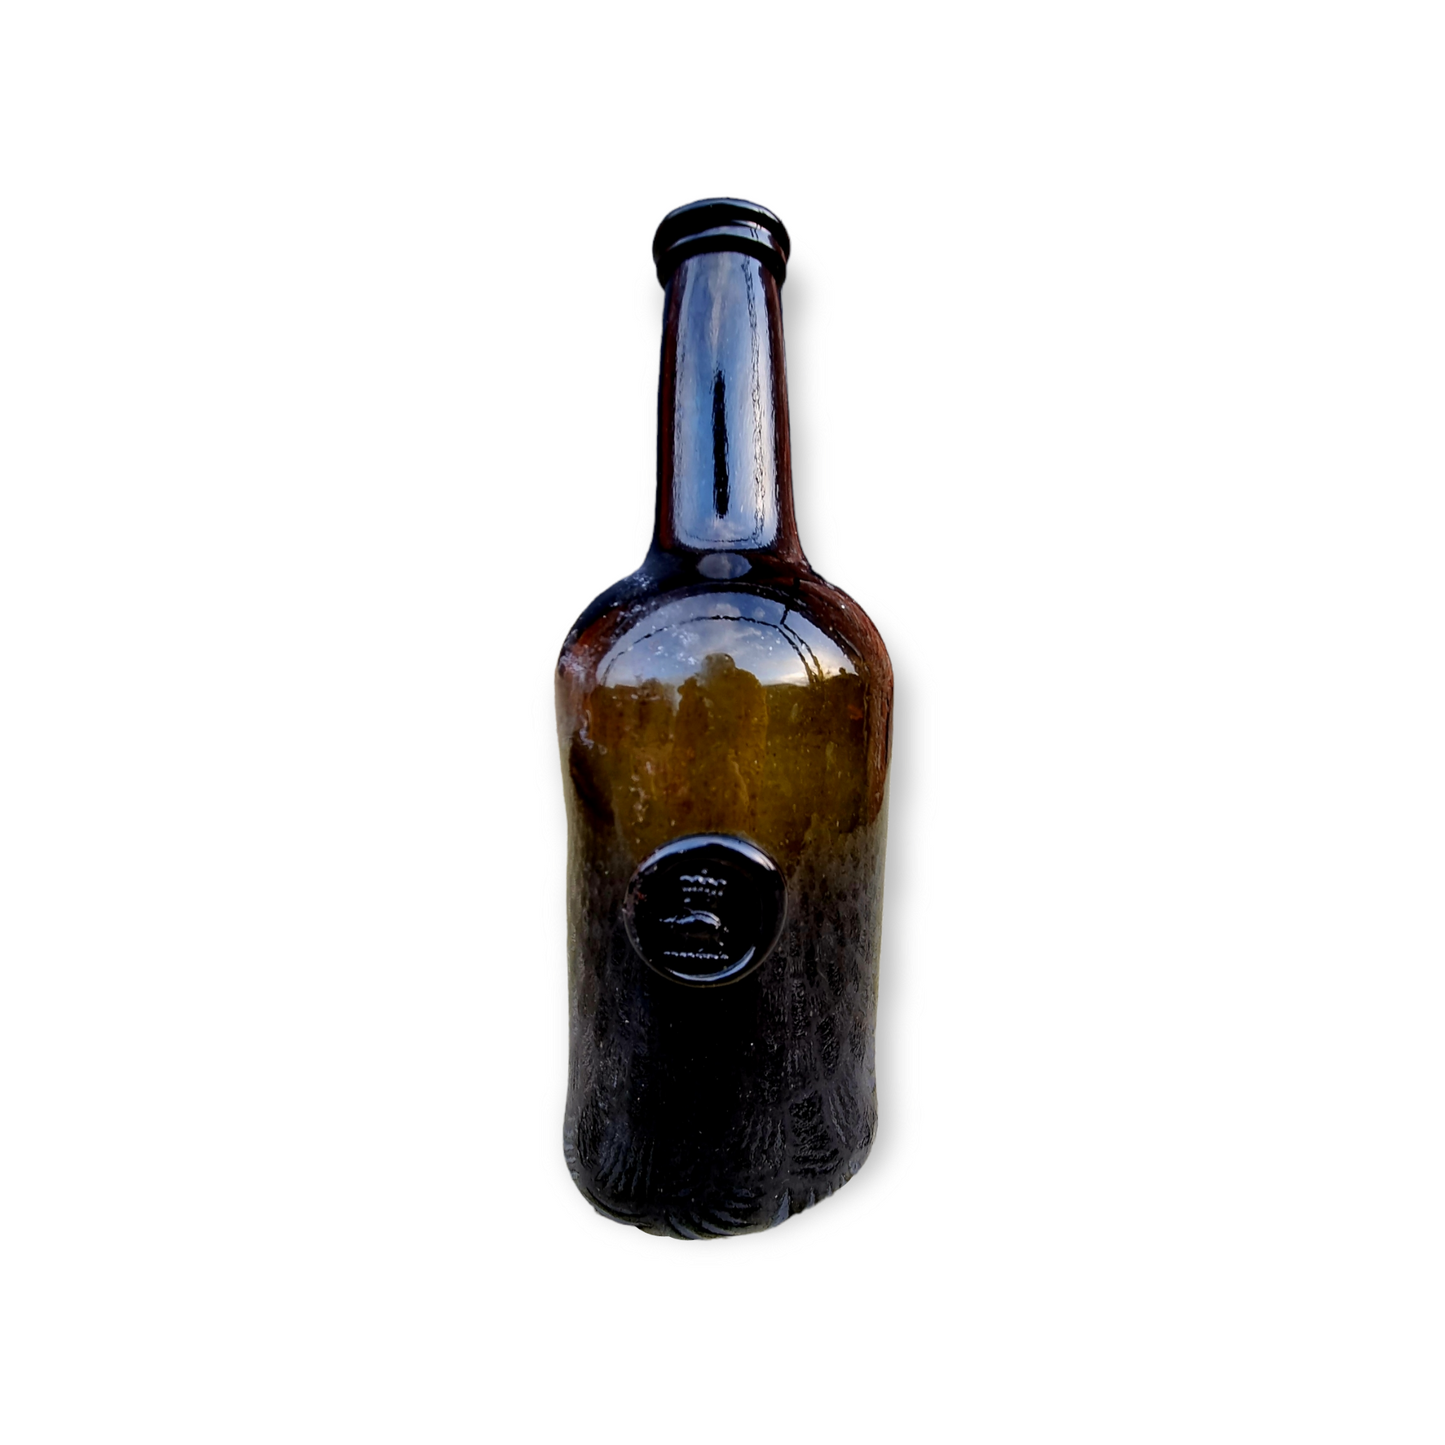 Mid 18th Century English Antique Seal Bottle, Bearing The Seal of The Edgcumbe Family